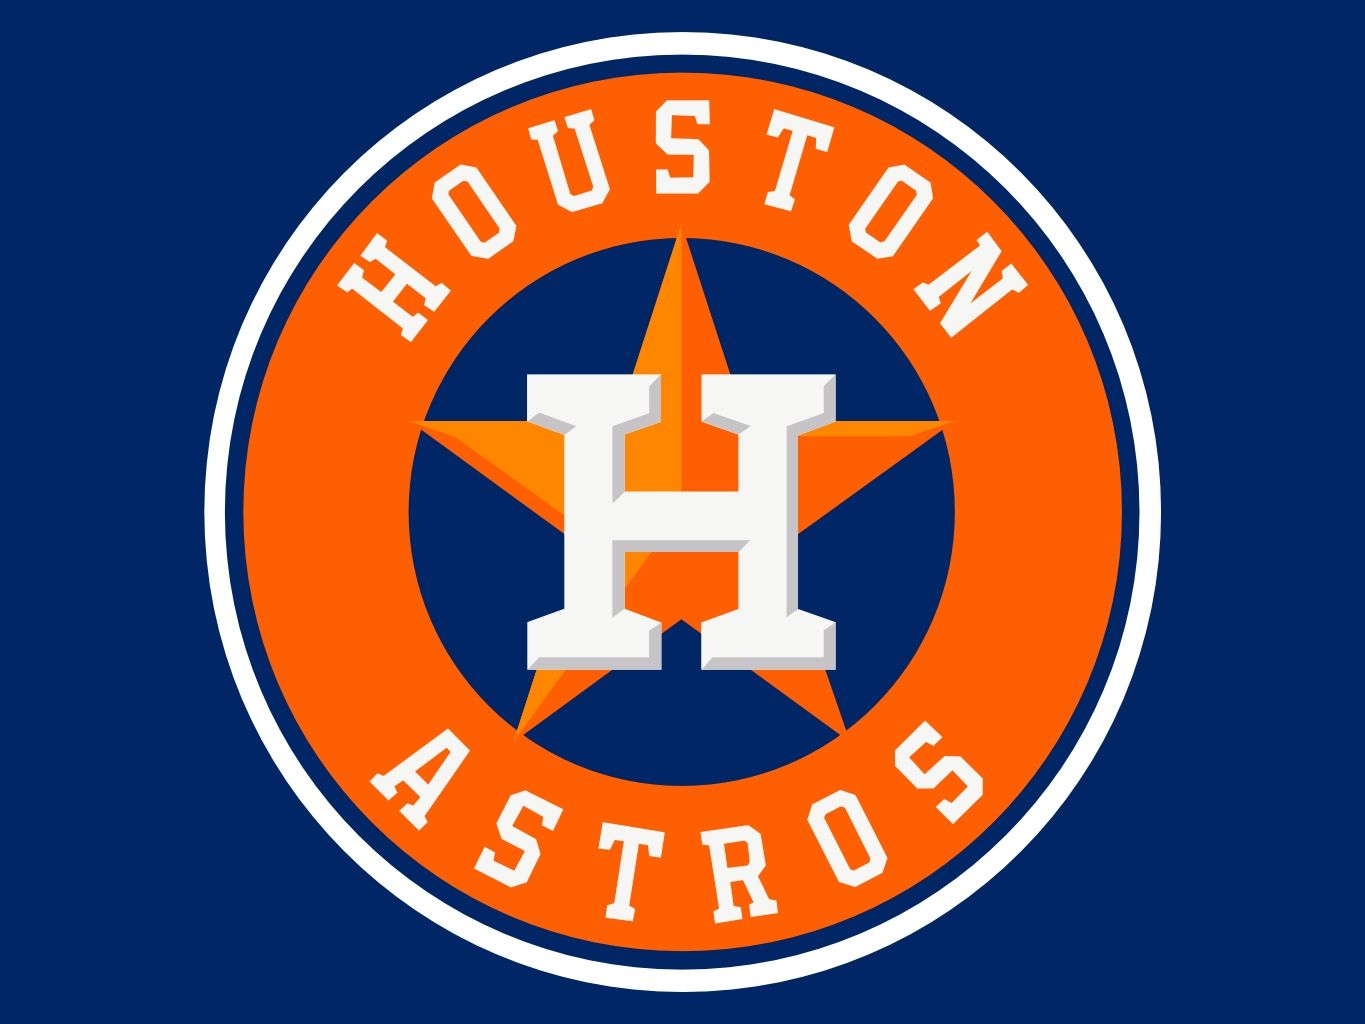 Houston Astros Wallpapers Discover more Astros, Astros Logo, Baseball, Houston  Astros, MLB wallpaper.…